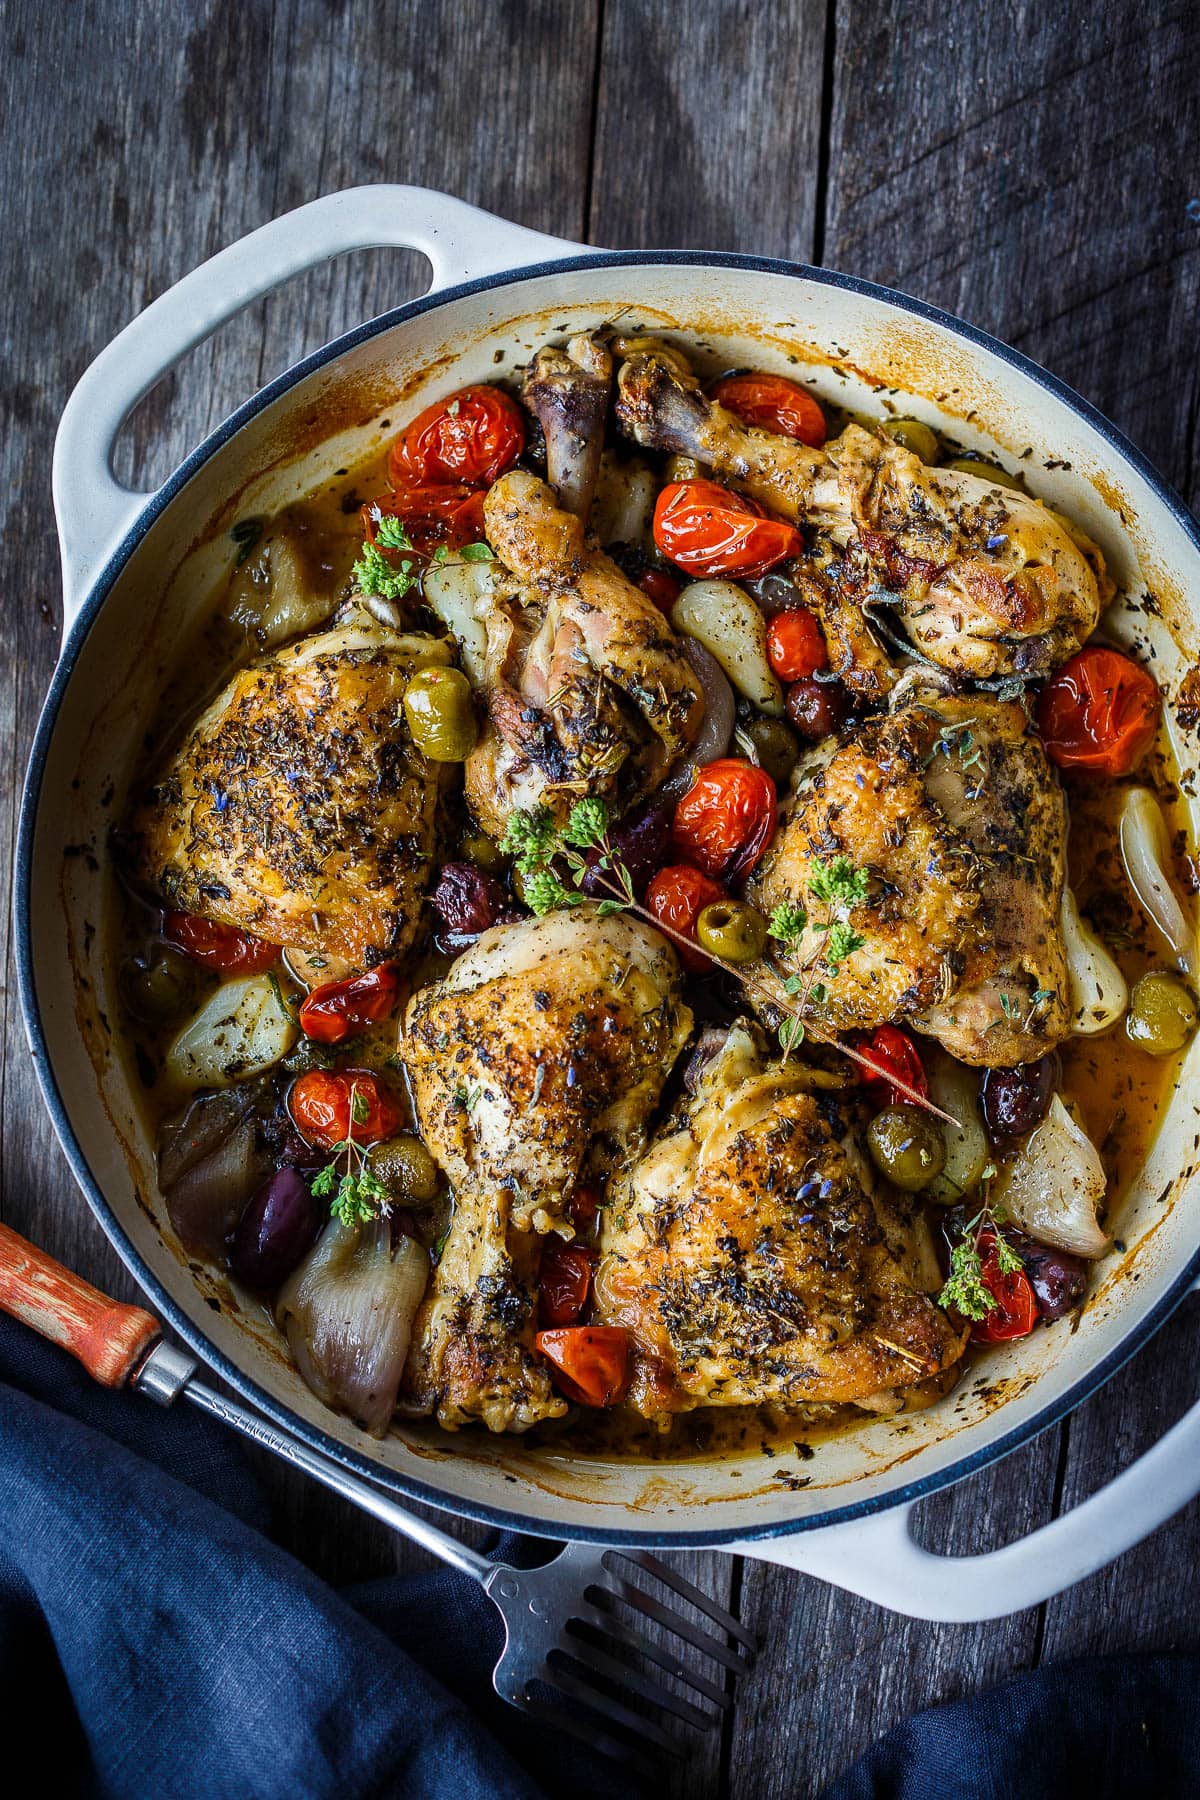 Chicken Provençal is seasoned with Herbs de Provence, and braised with white wine, tomatoes, olives, garlic and shallots until tender & fragrant. 